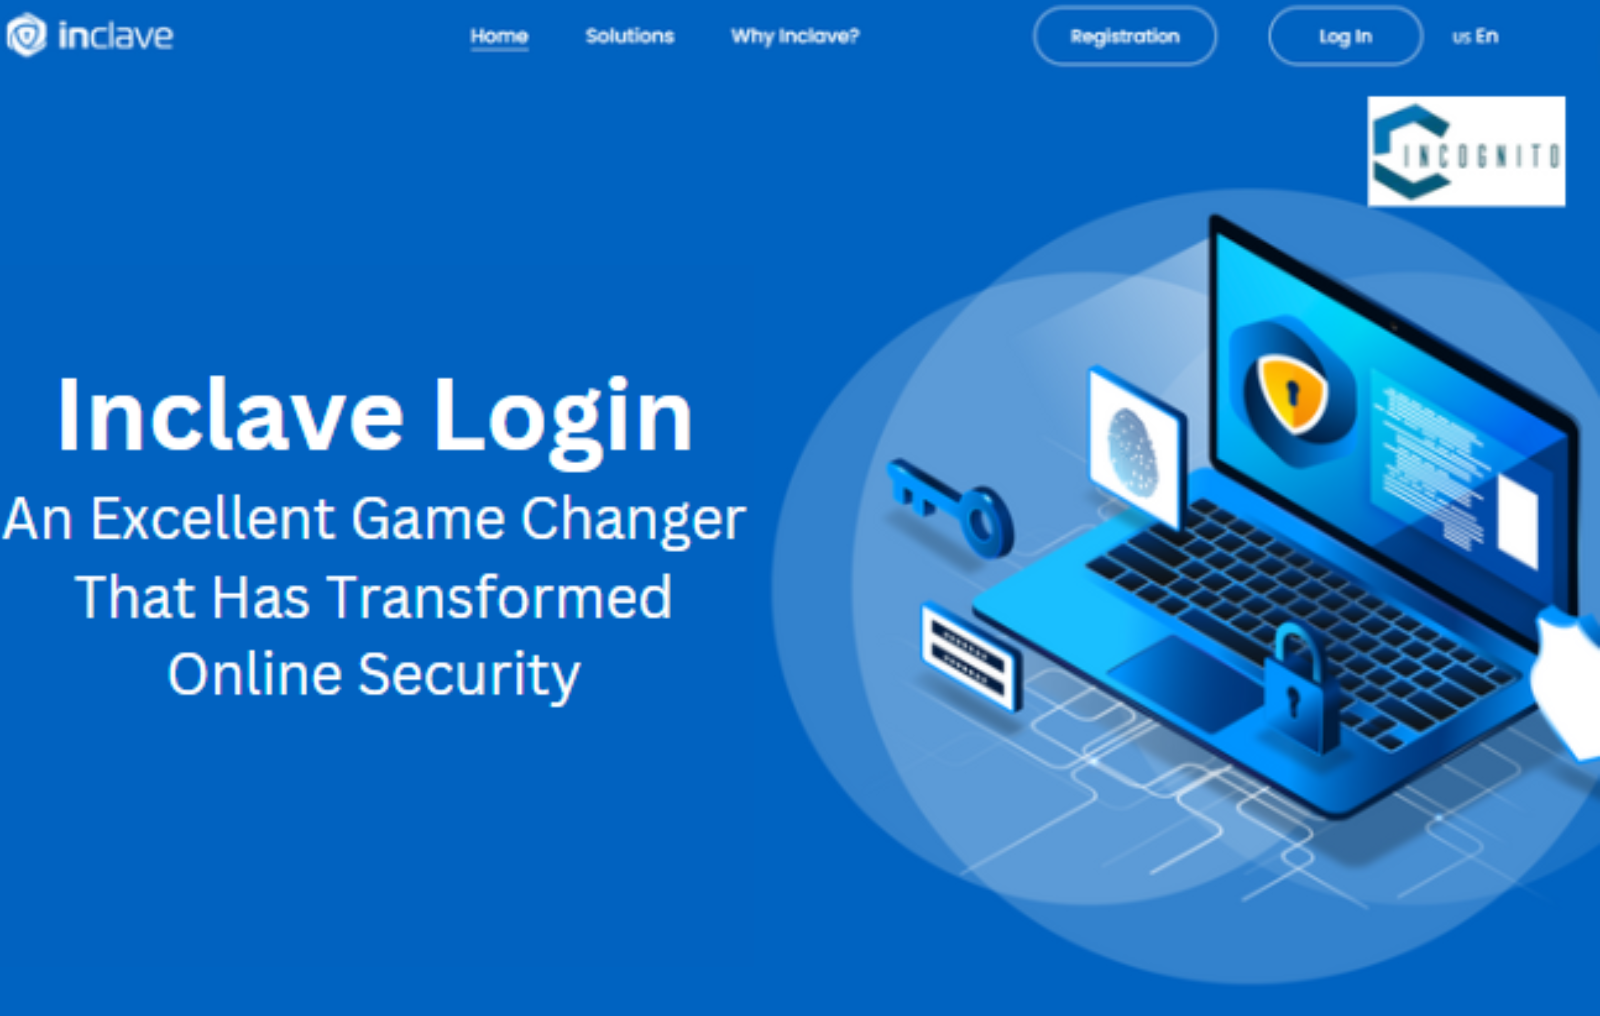 Inclave Login: An Excellent Game Changer That Has Transformed Online Security